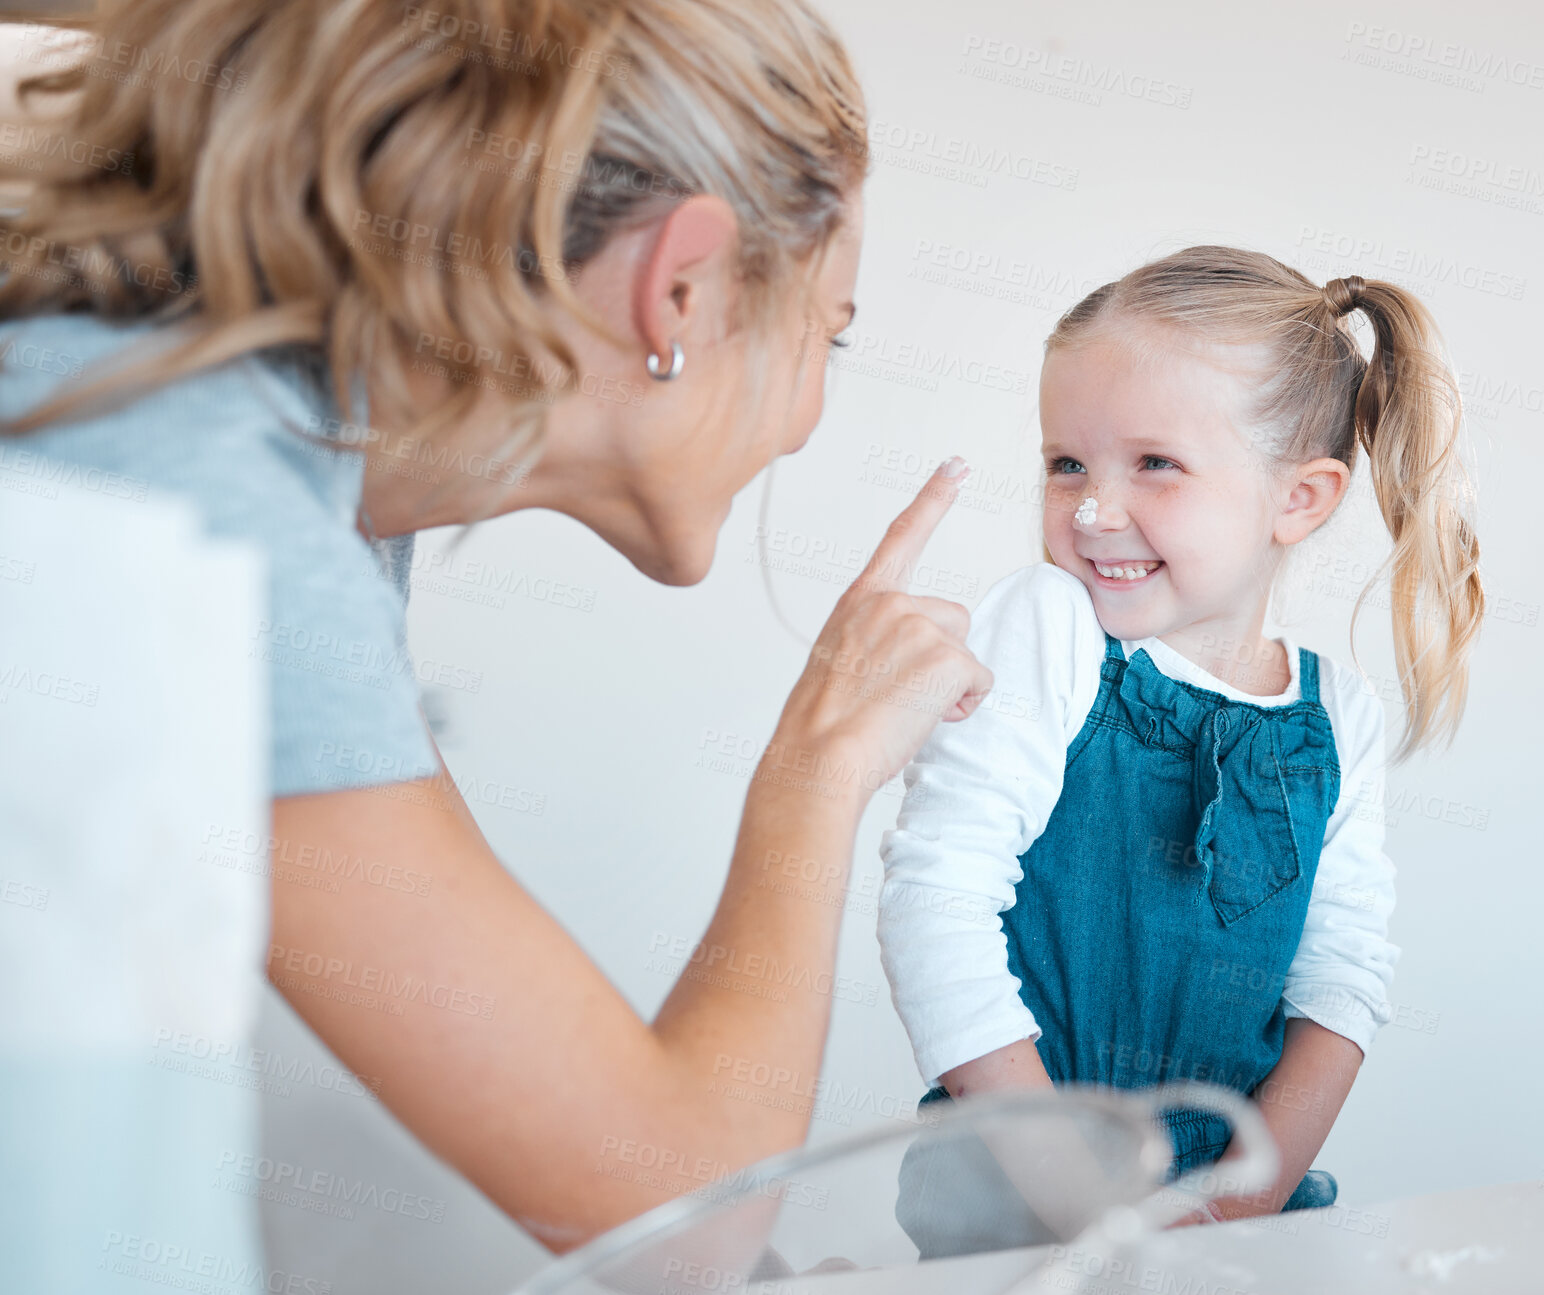 Buy stock photo Little girl putting flour on her mothers nose. Little child baking with her mom. Mother and daughter bonding while baking in the kitchen. Parent baking with her kid.